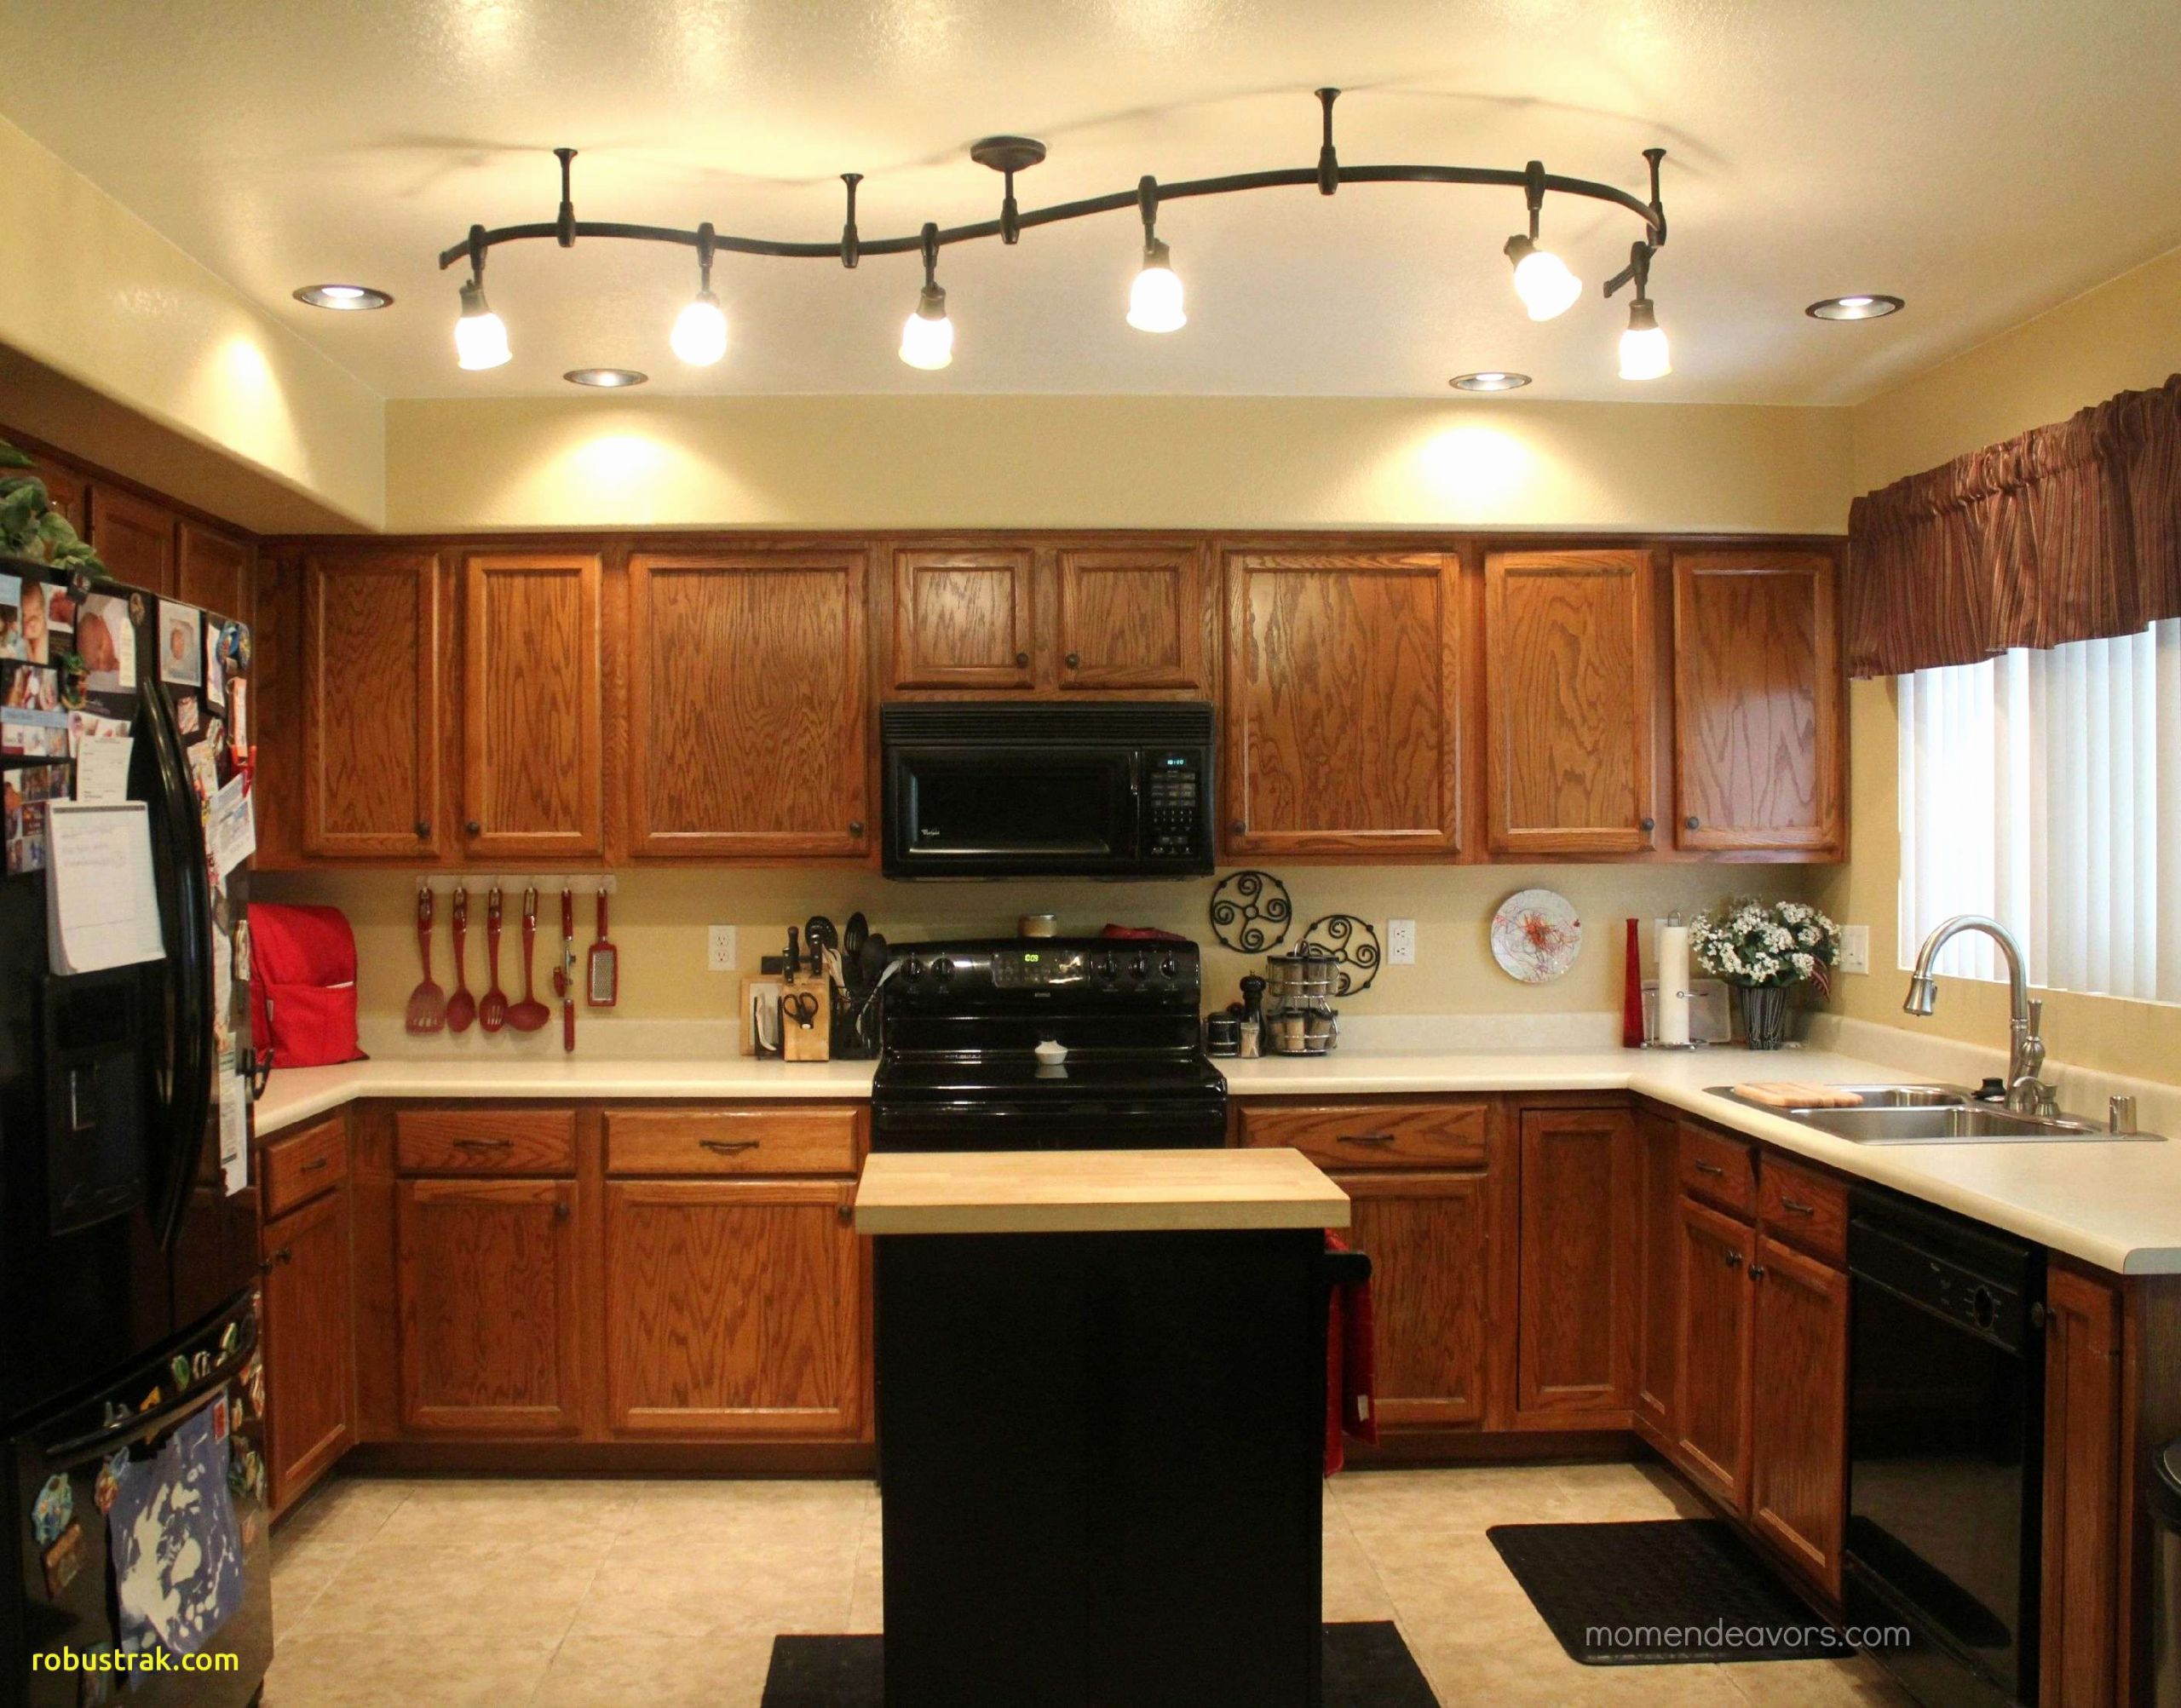 Lowes Kitchen Island Lighting
 New Kitchen Track Lighting Lowes